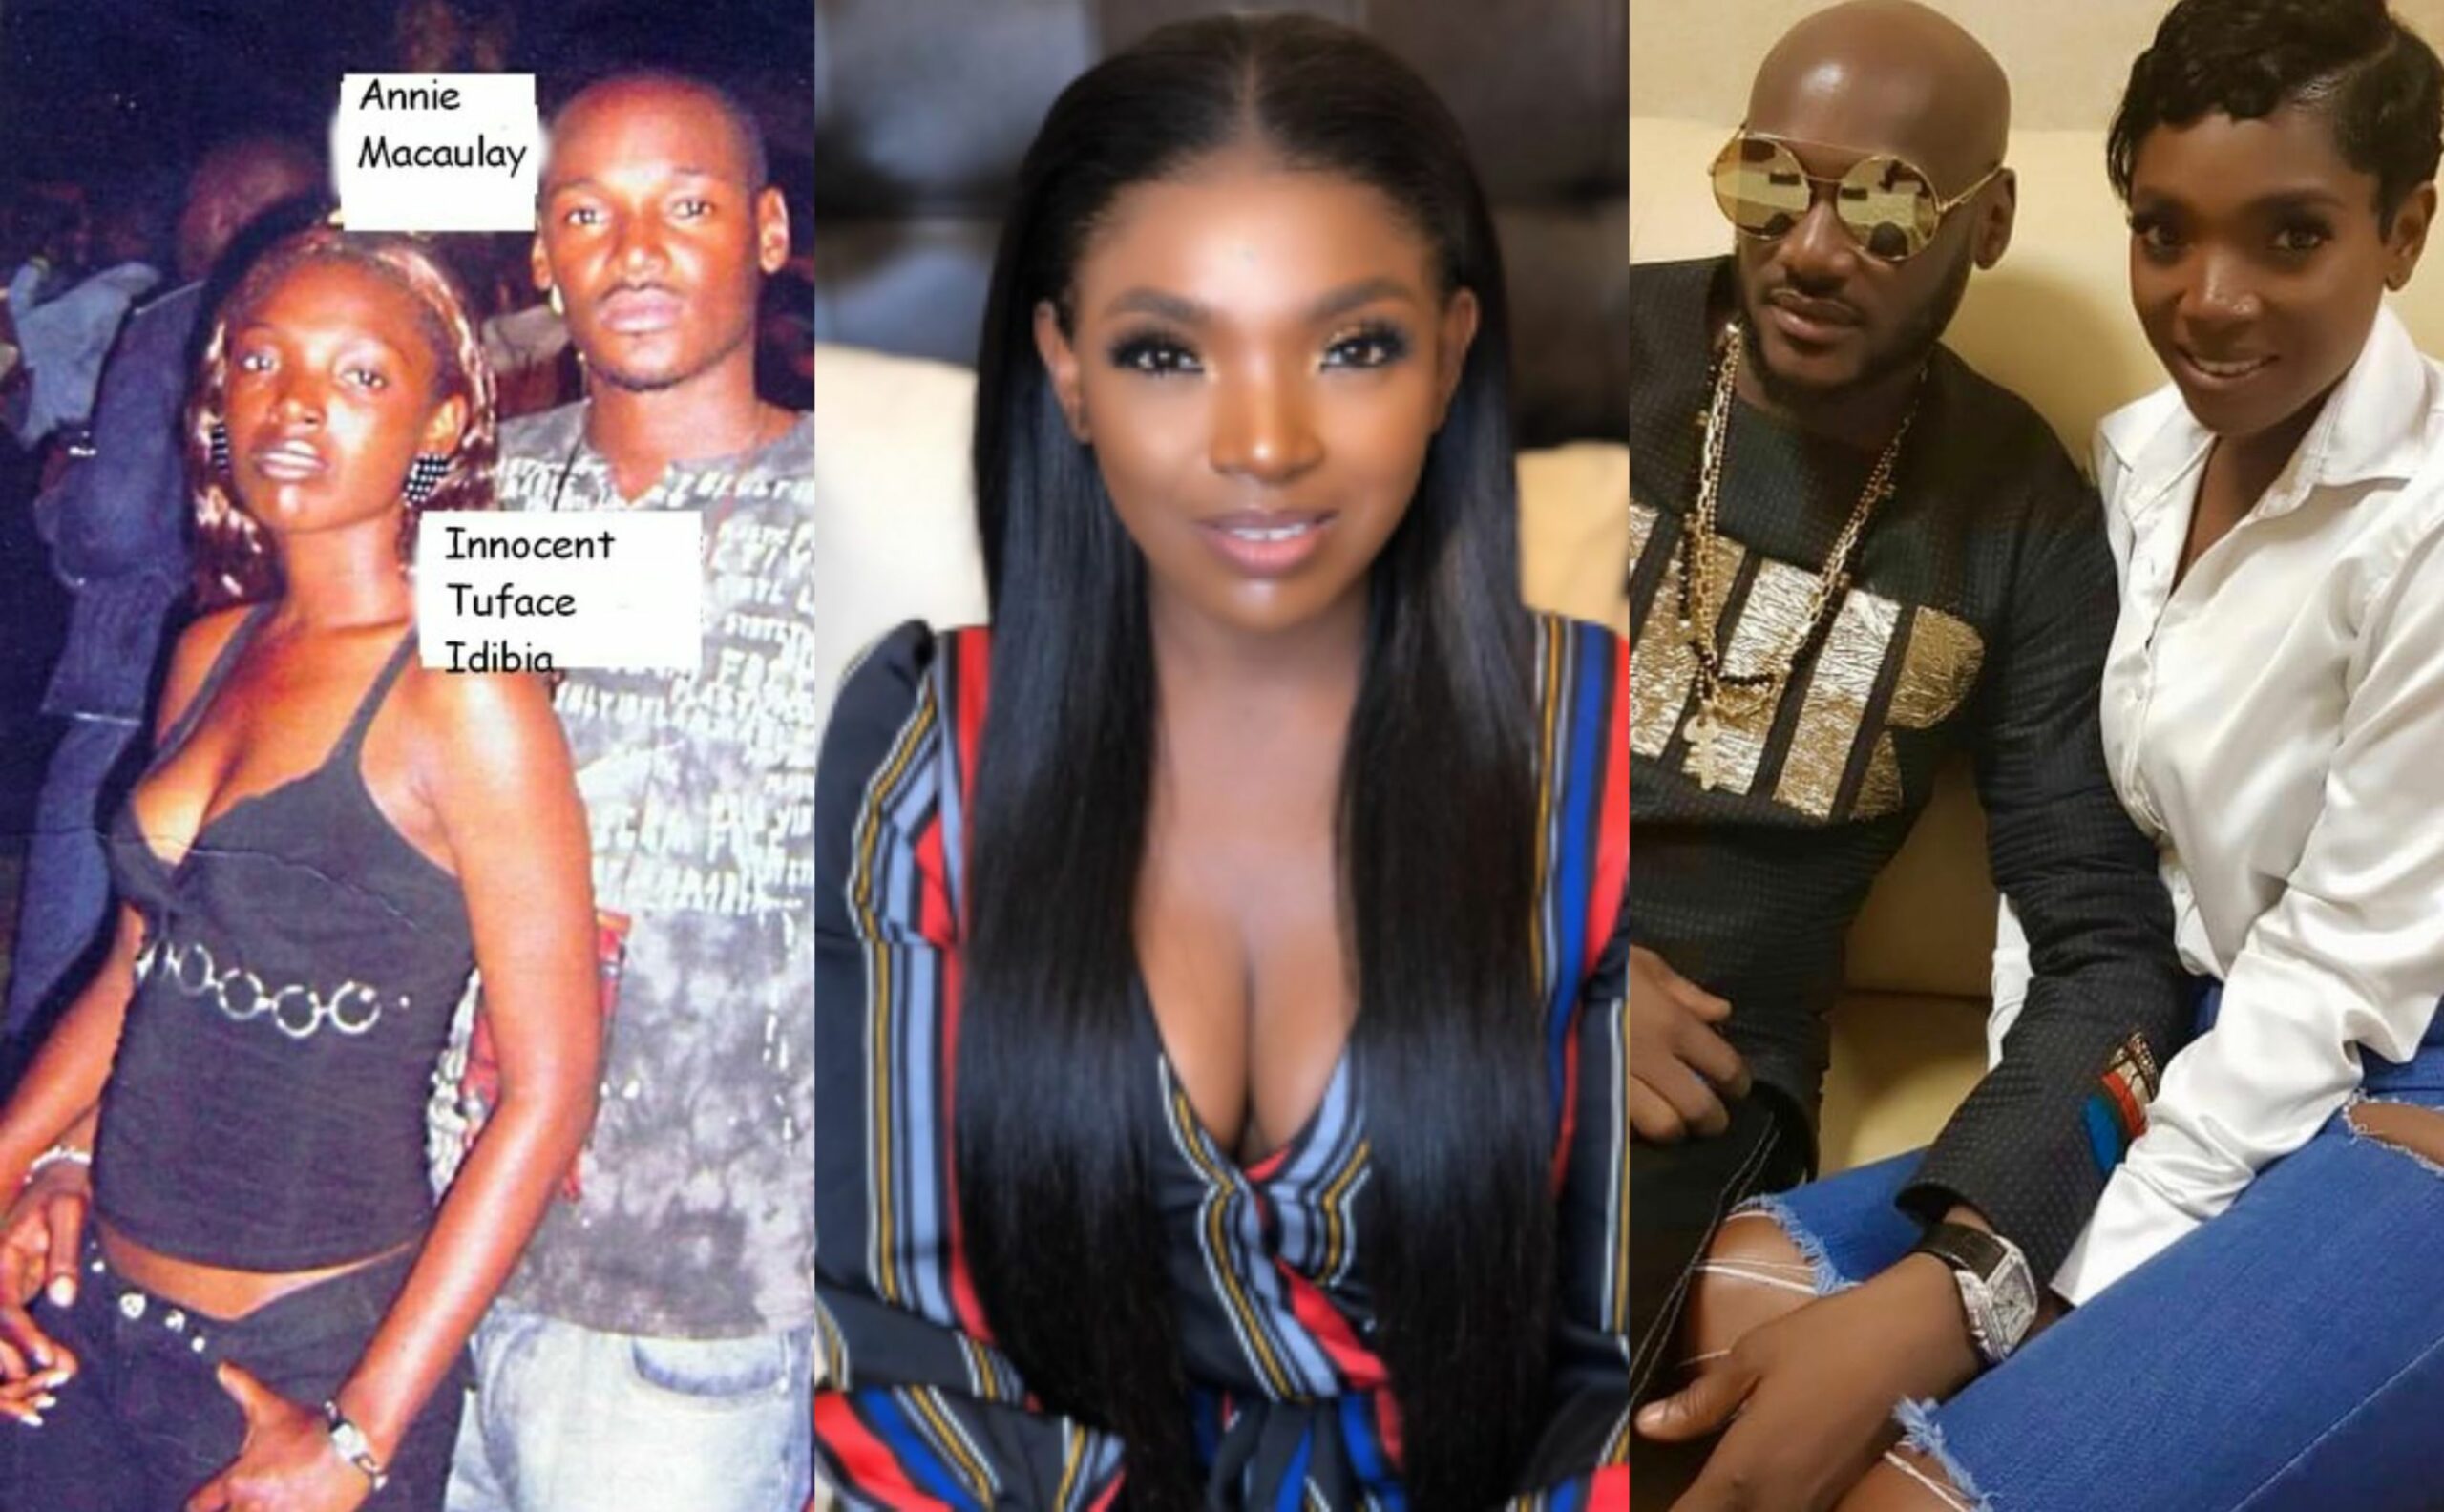 “I chose Annie because she offered me her all when we had very little” -2face opens up